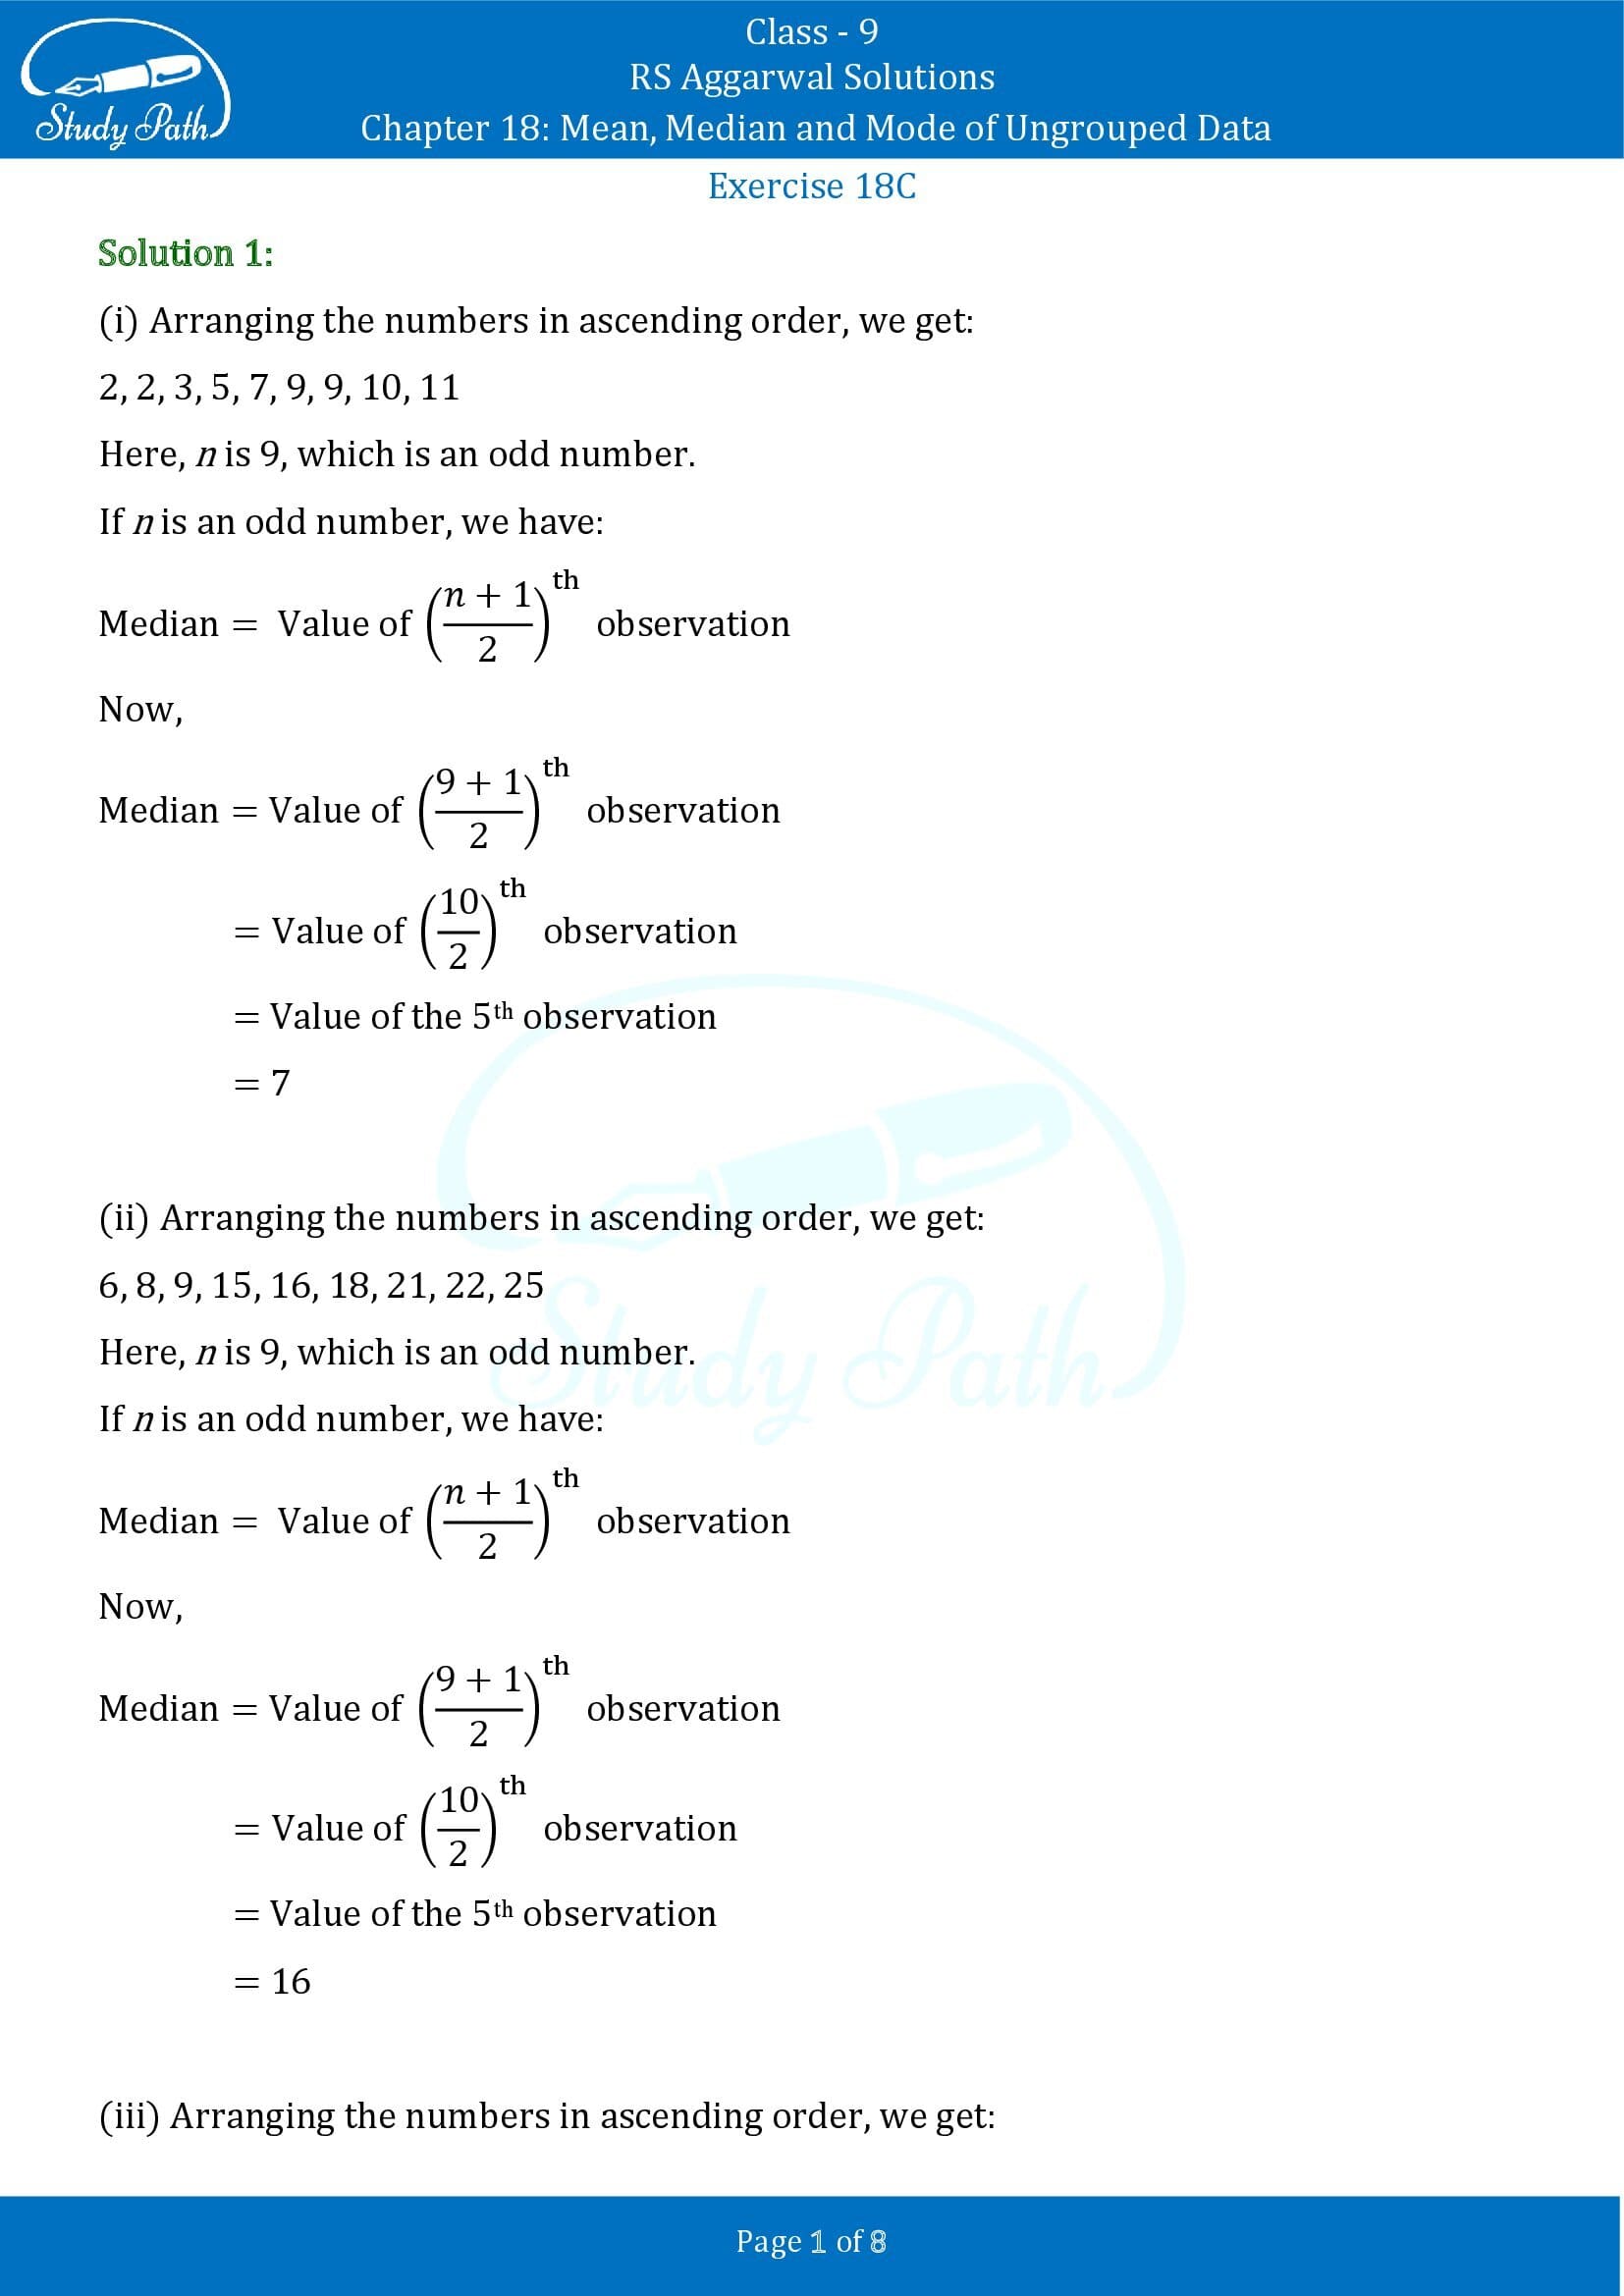 RS Aggarwal Solutions Class 9 Chapter 18 Mean Median and Mode of Ungrouped Data Exercise 18C 0001